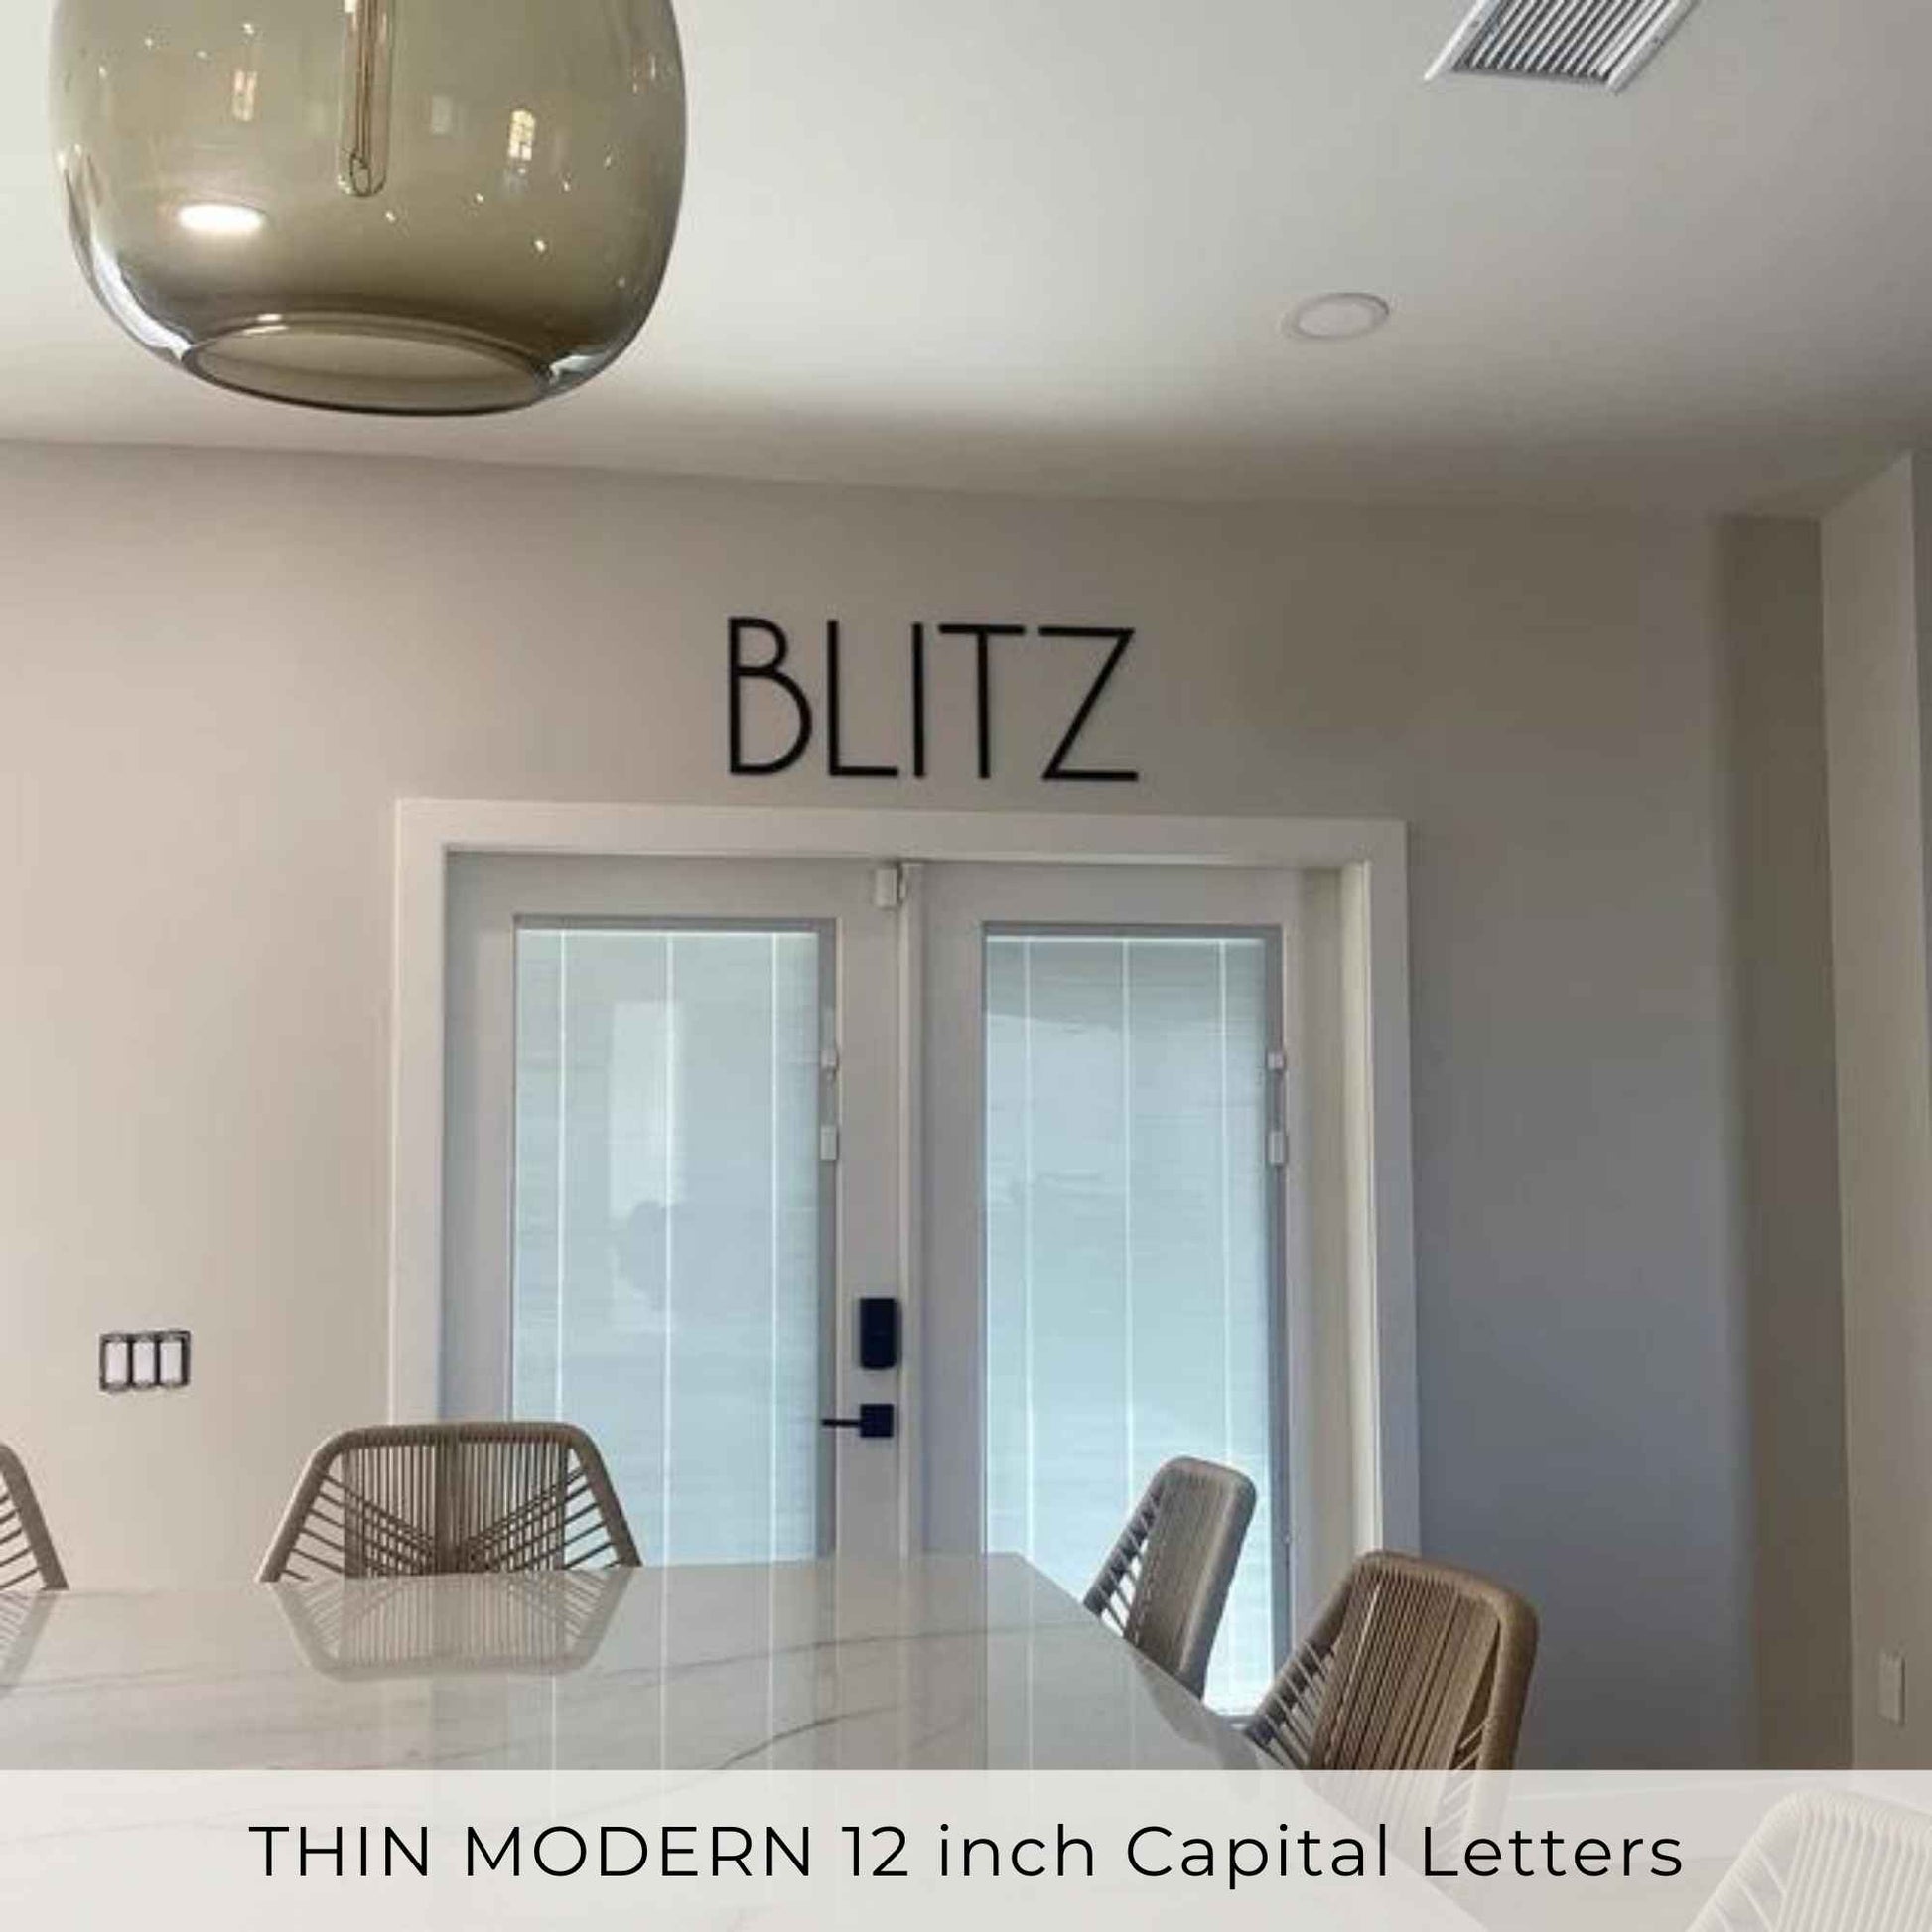 THIN MODERN house numbers and letters to spell family name and personalized home decor